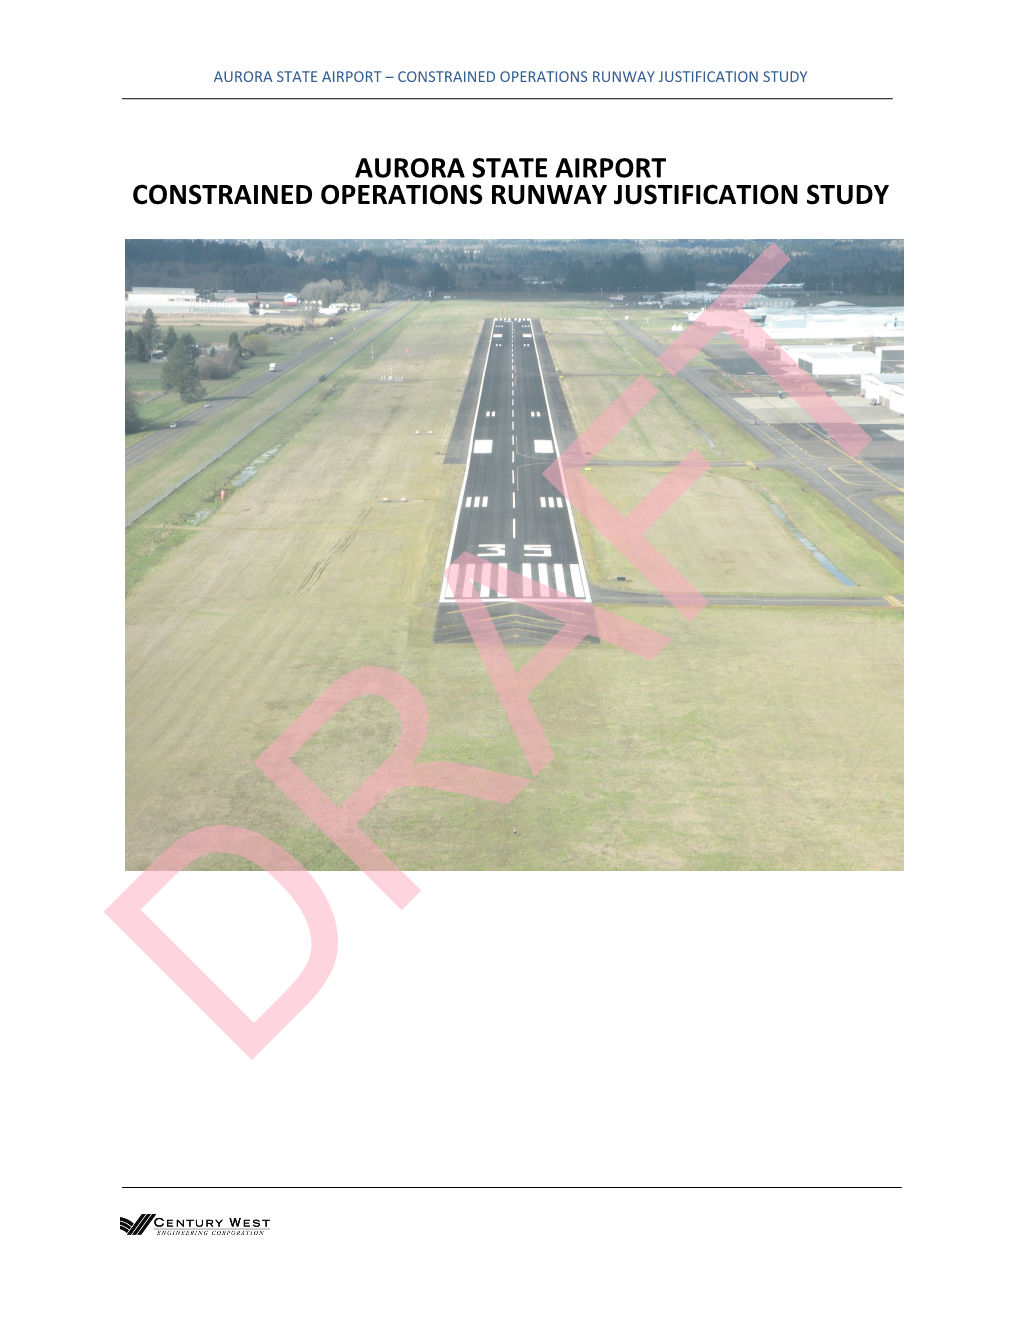 Aurora State Airport Constrained Operations Runway Justification Study